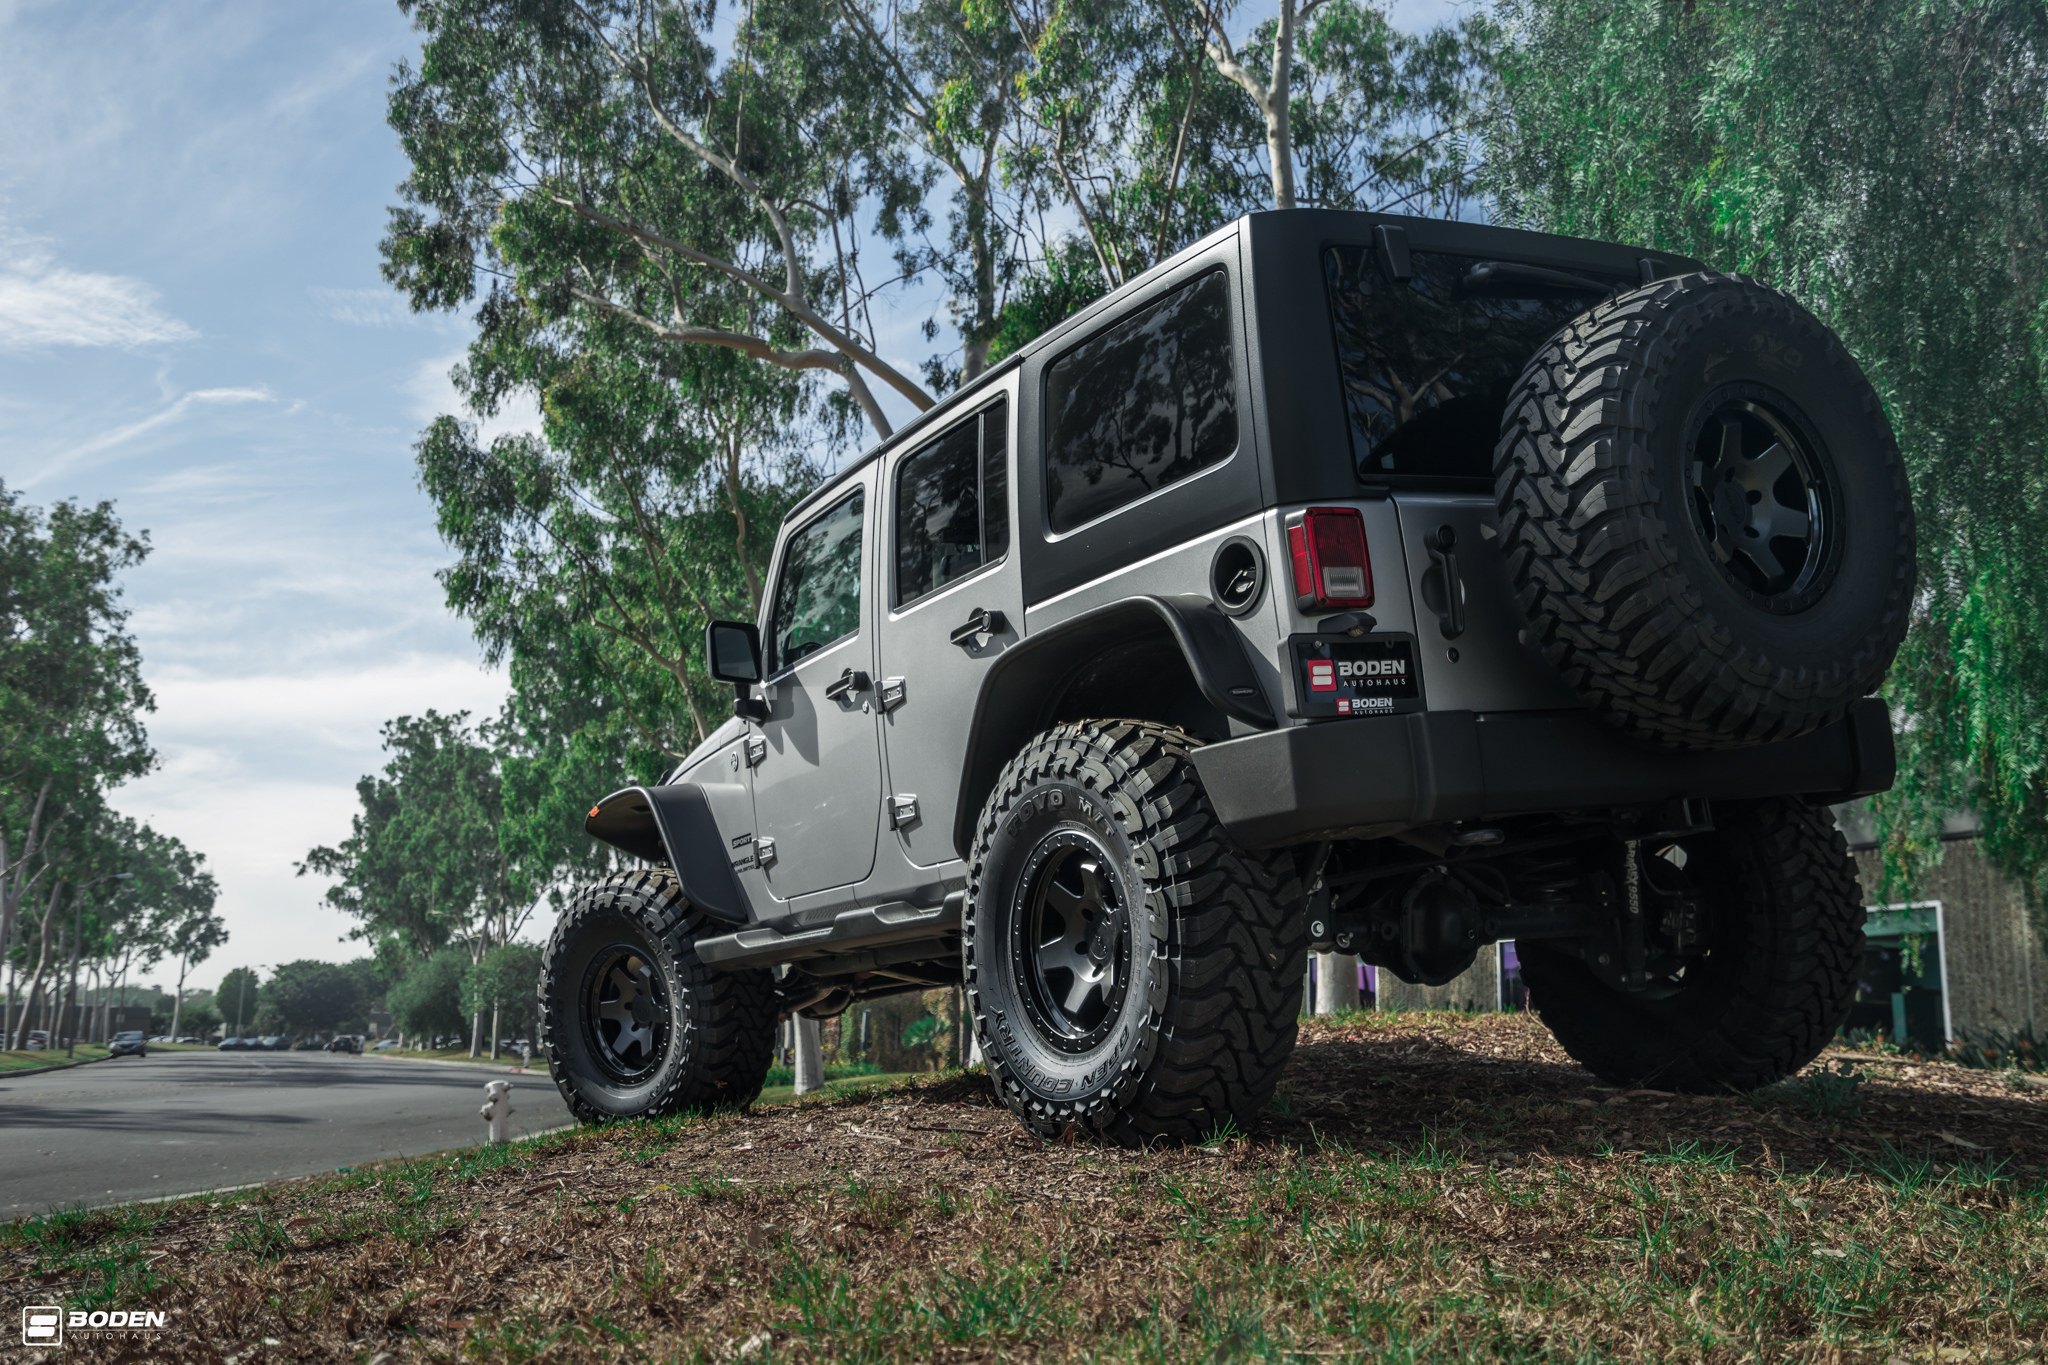 Gray Jeep Wrangler with Rotiform Spare Tire Kit - Photo by Boden Autohaus